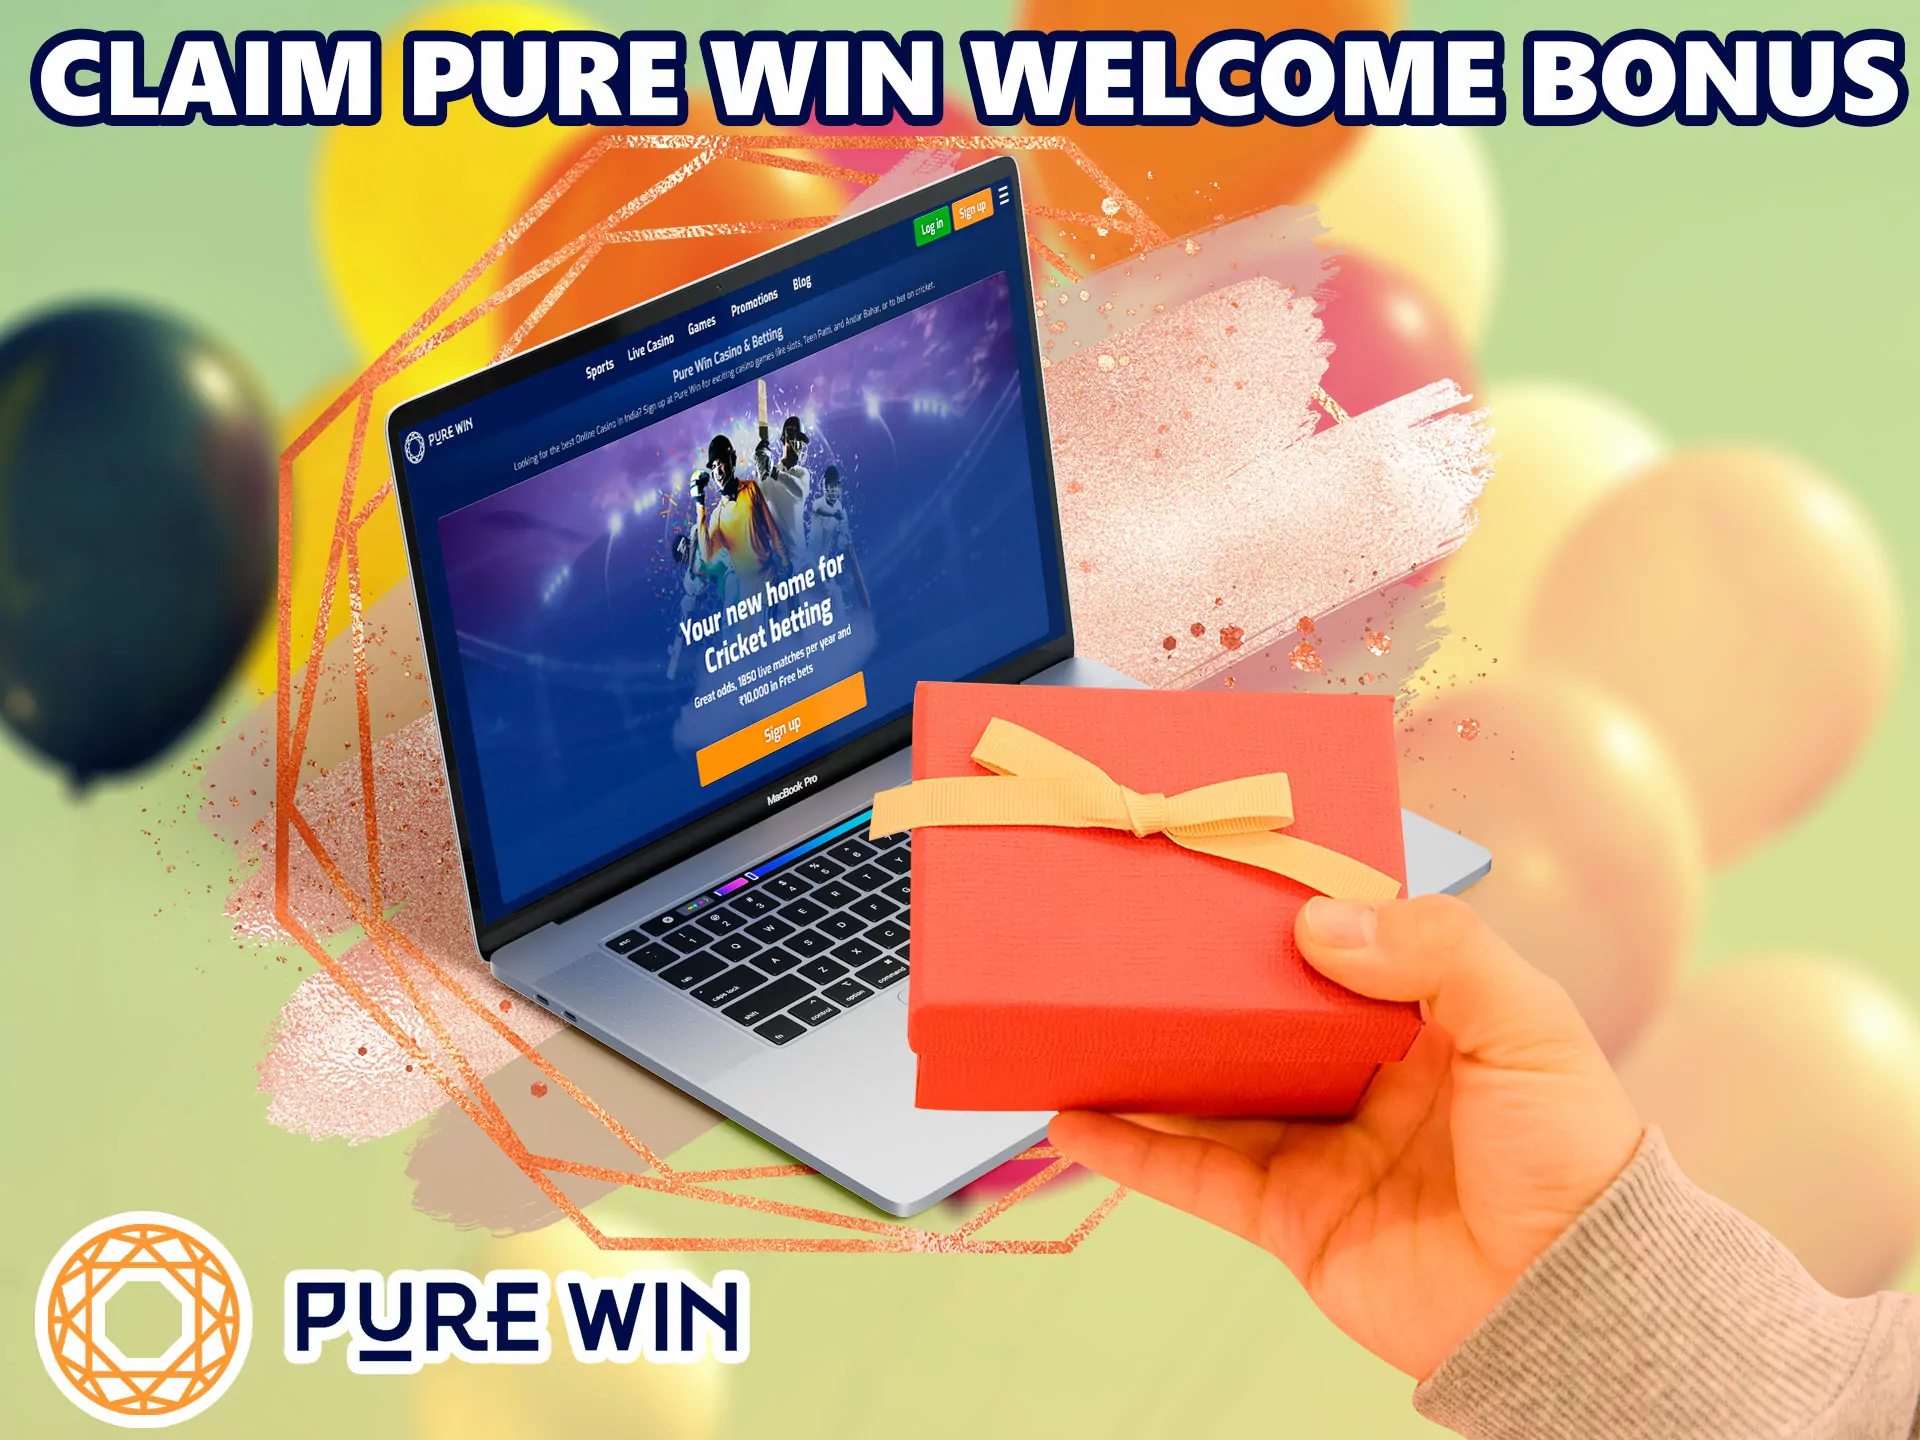 Each Pure Win player can get +100% on your first deposit up to 33,000 BDT.